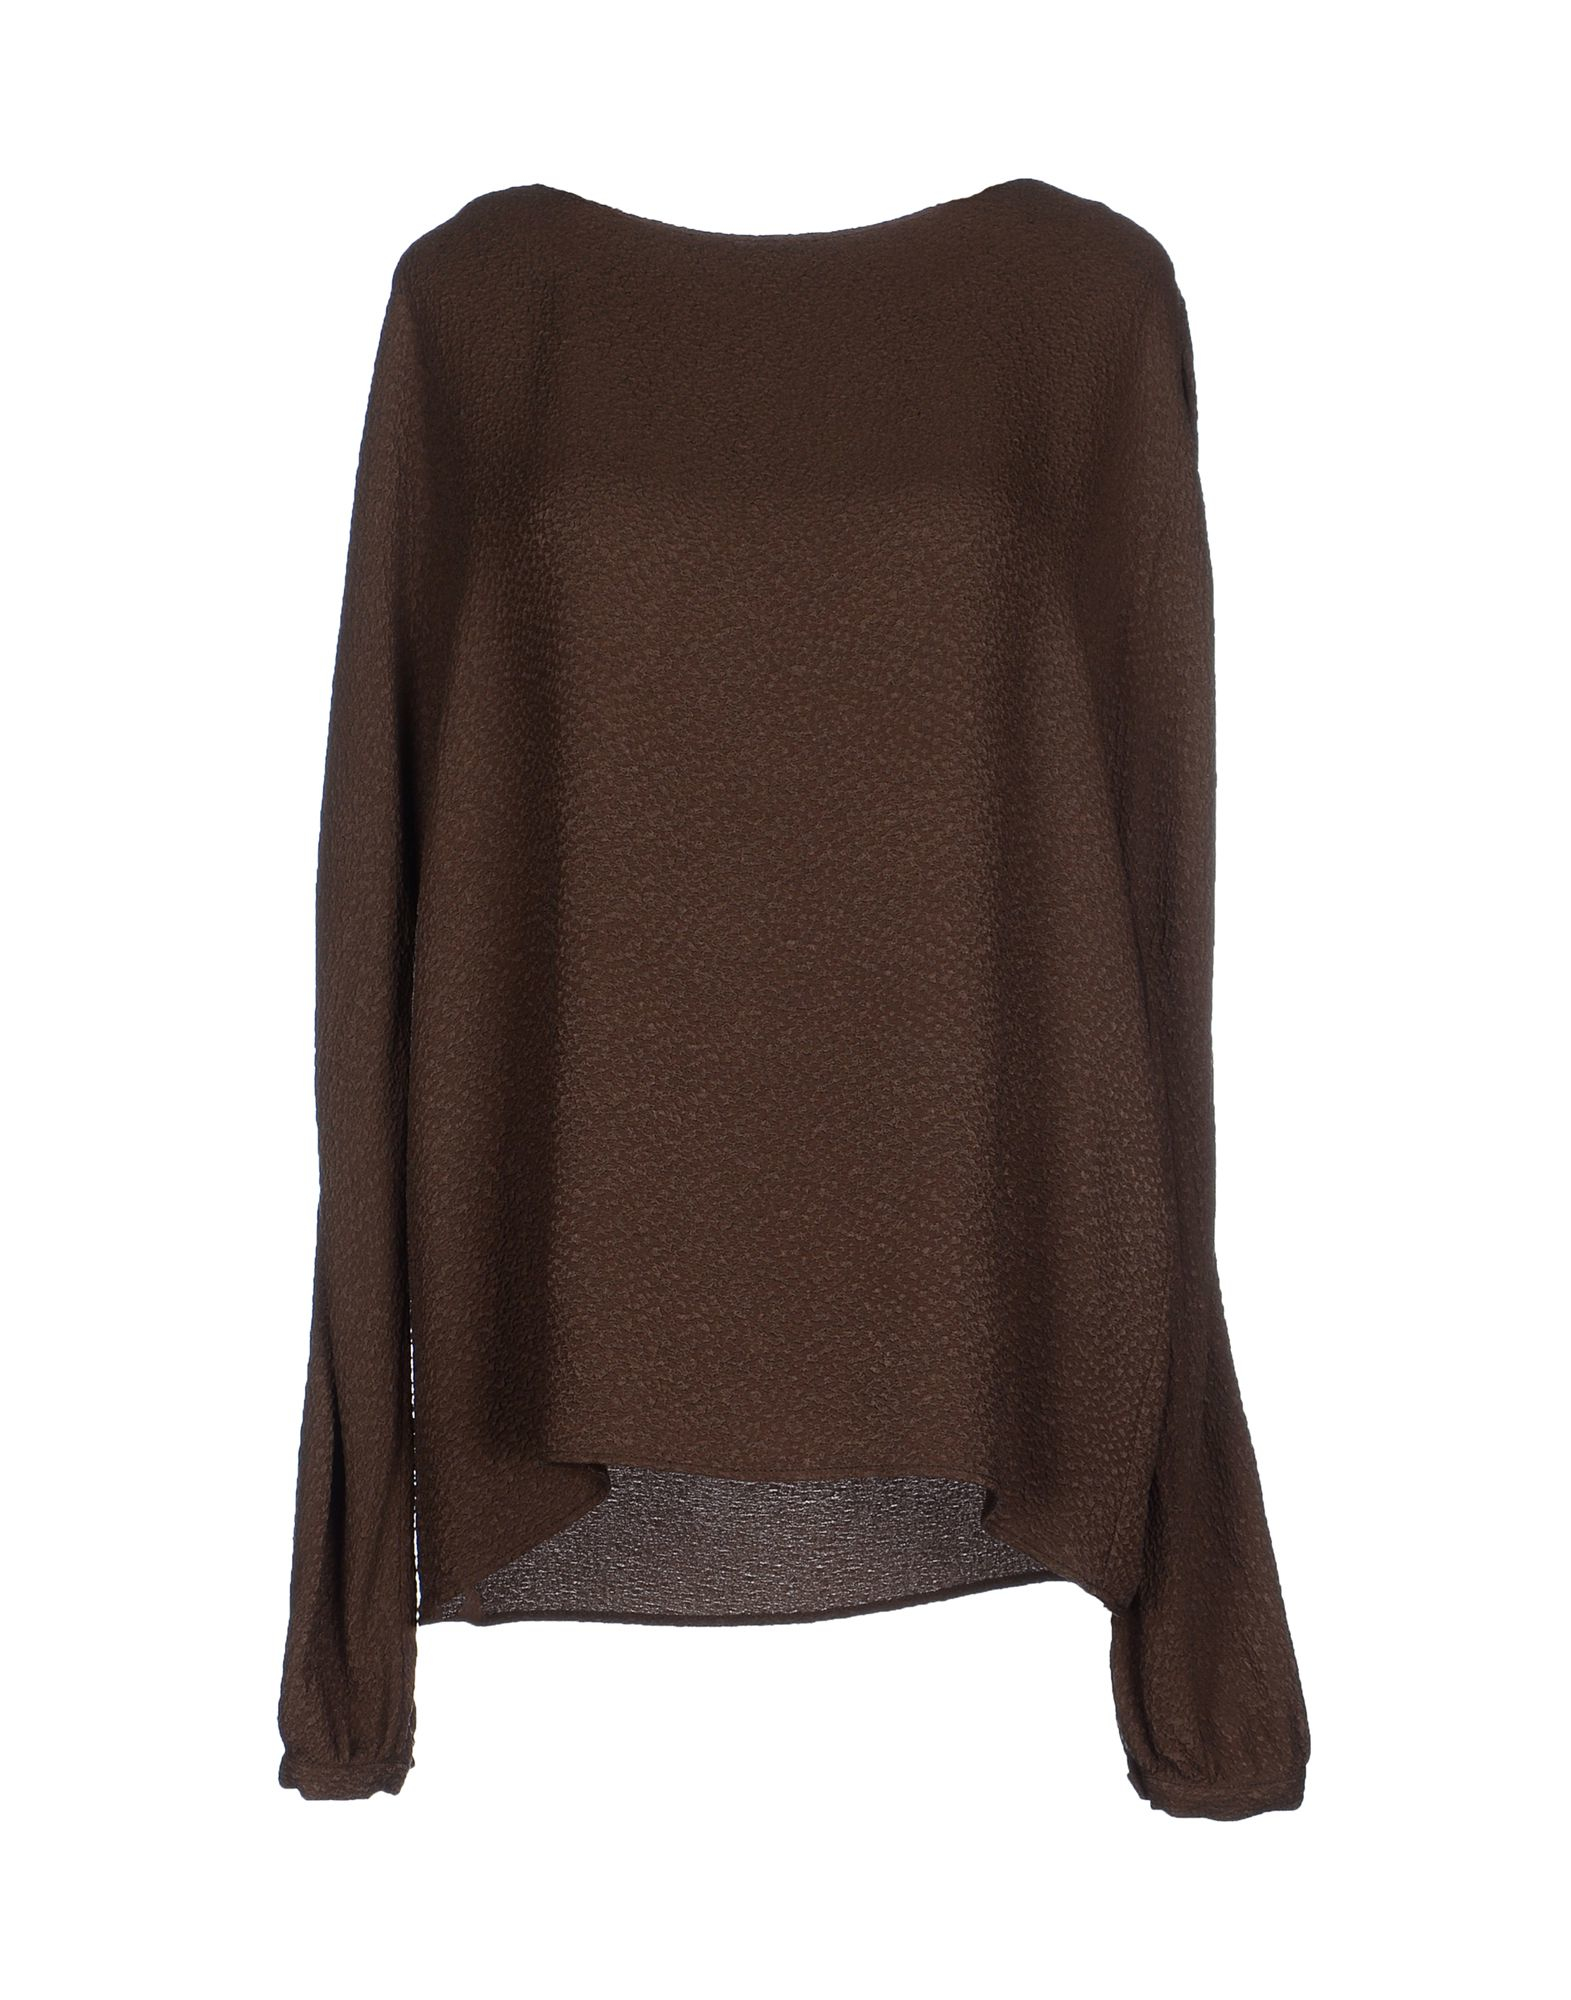 Fui Synthetic Blouse in Dark Brown ...